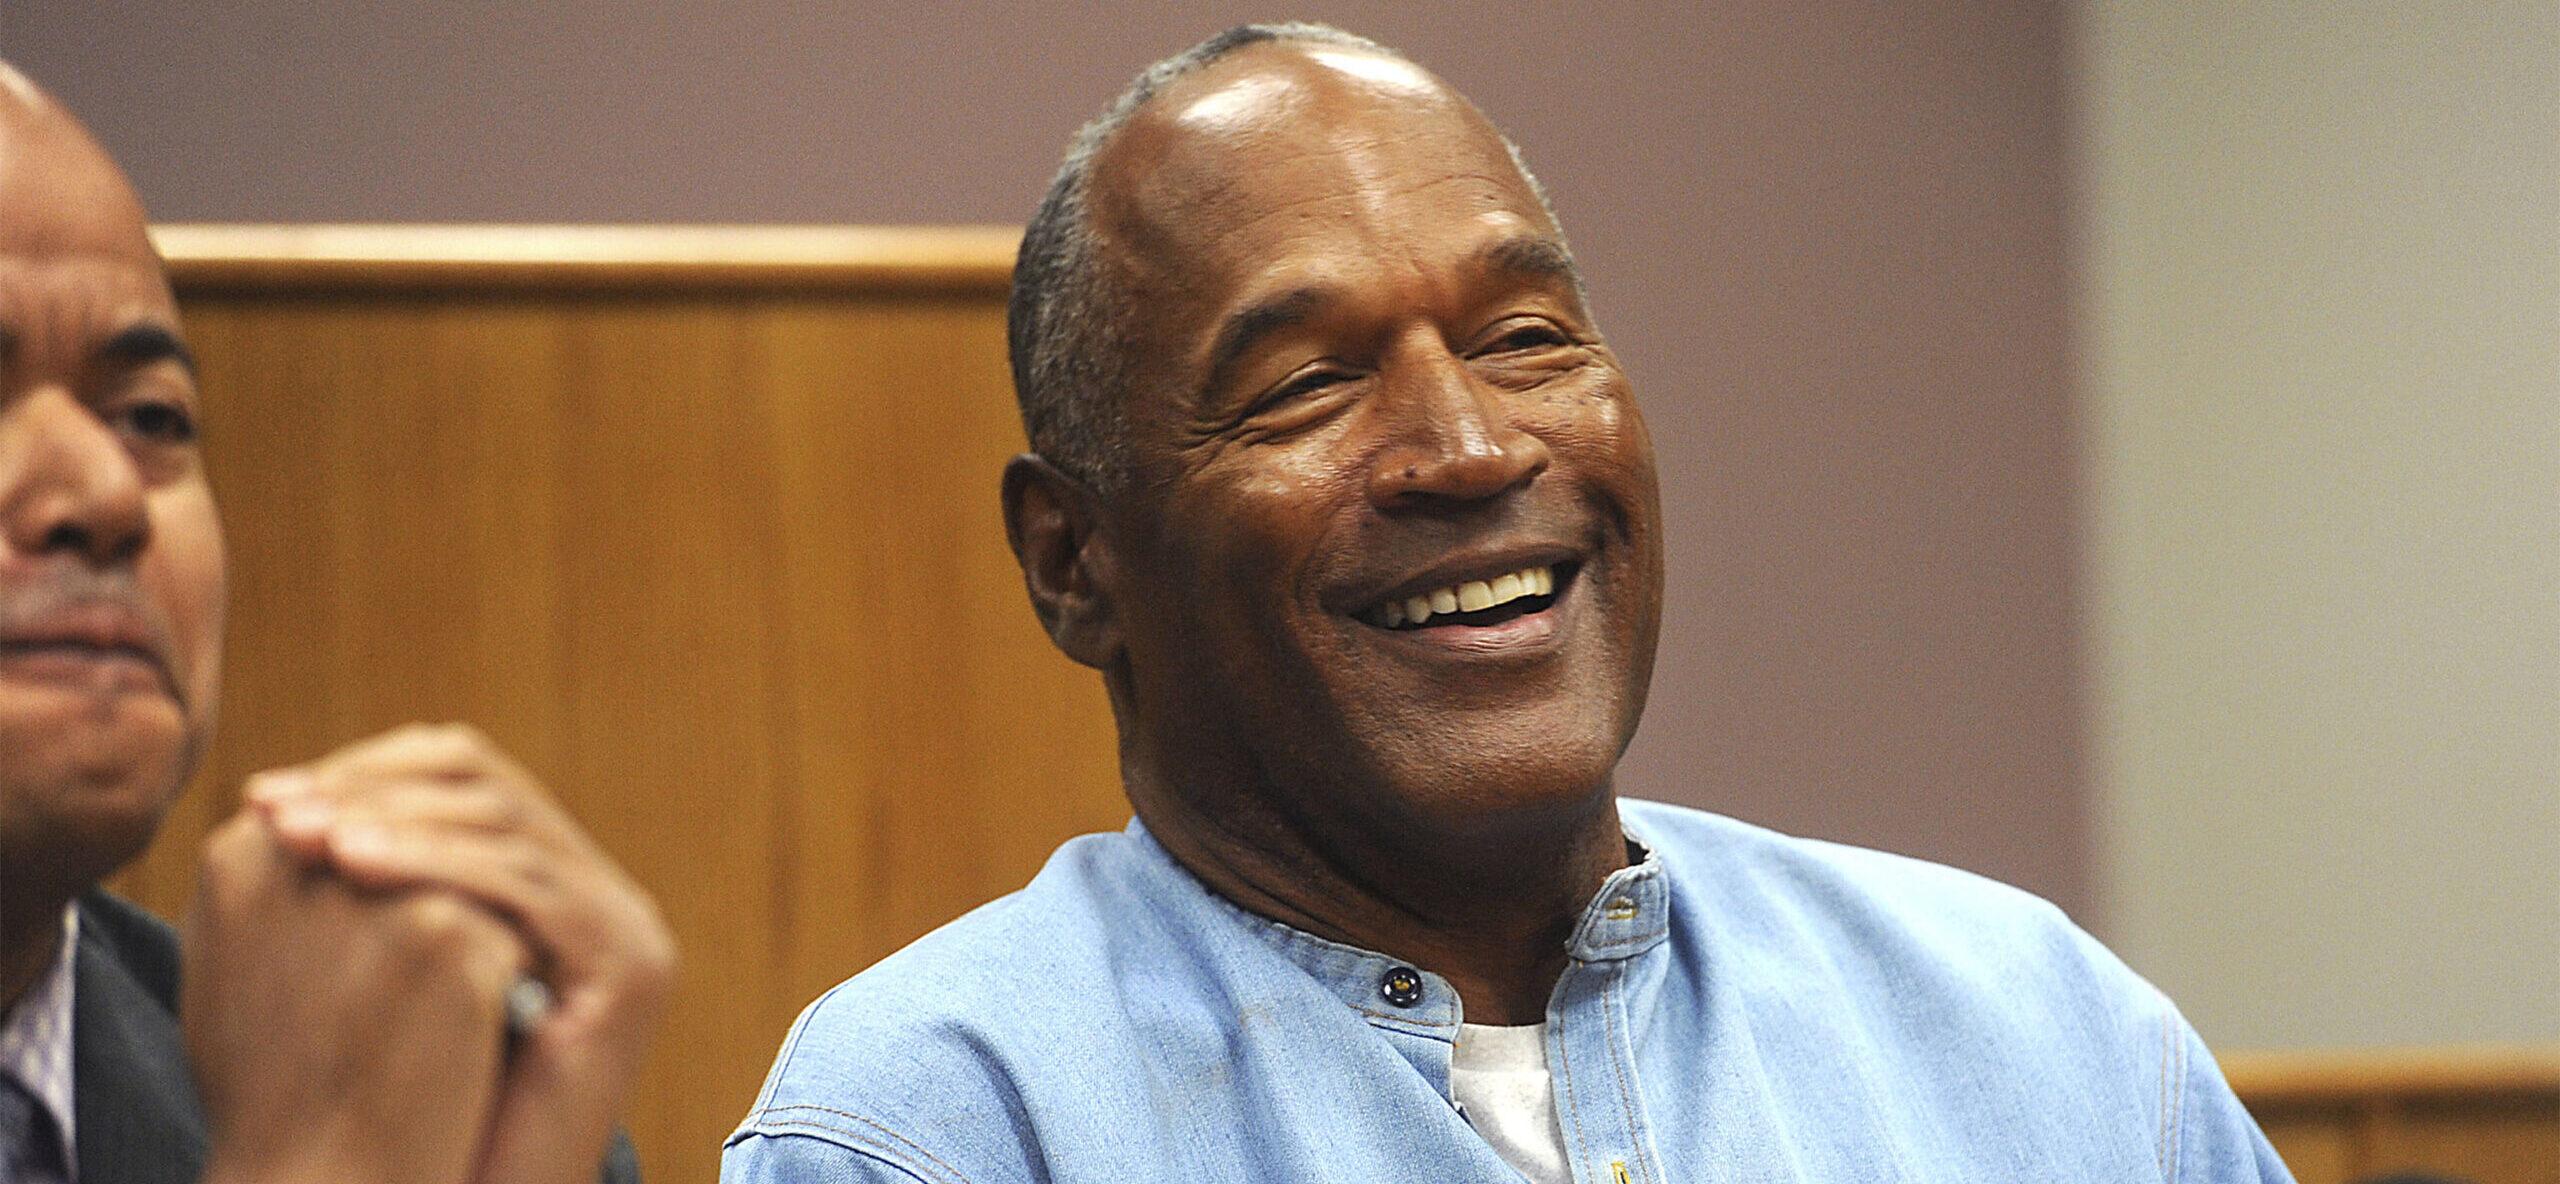 OJ Simpson Diagnosed With Prostate Cancer, Undergoing Chemotherapy